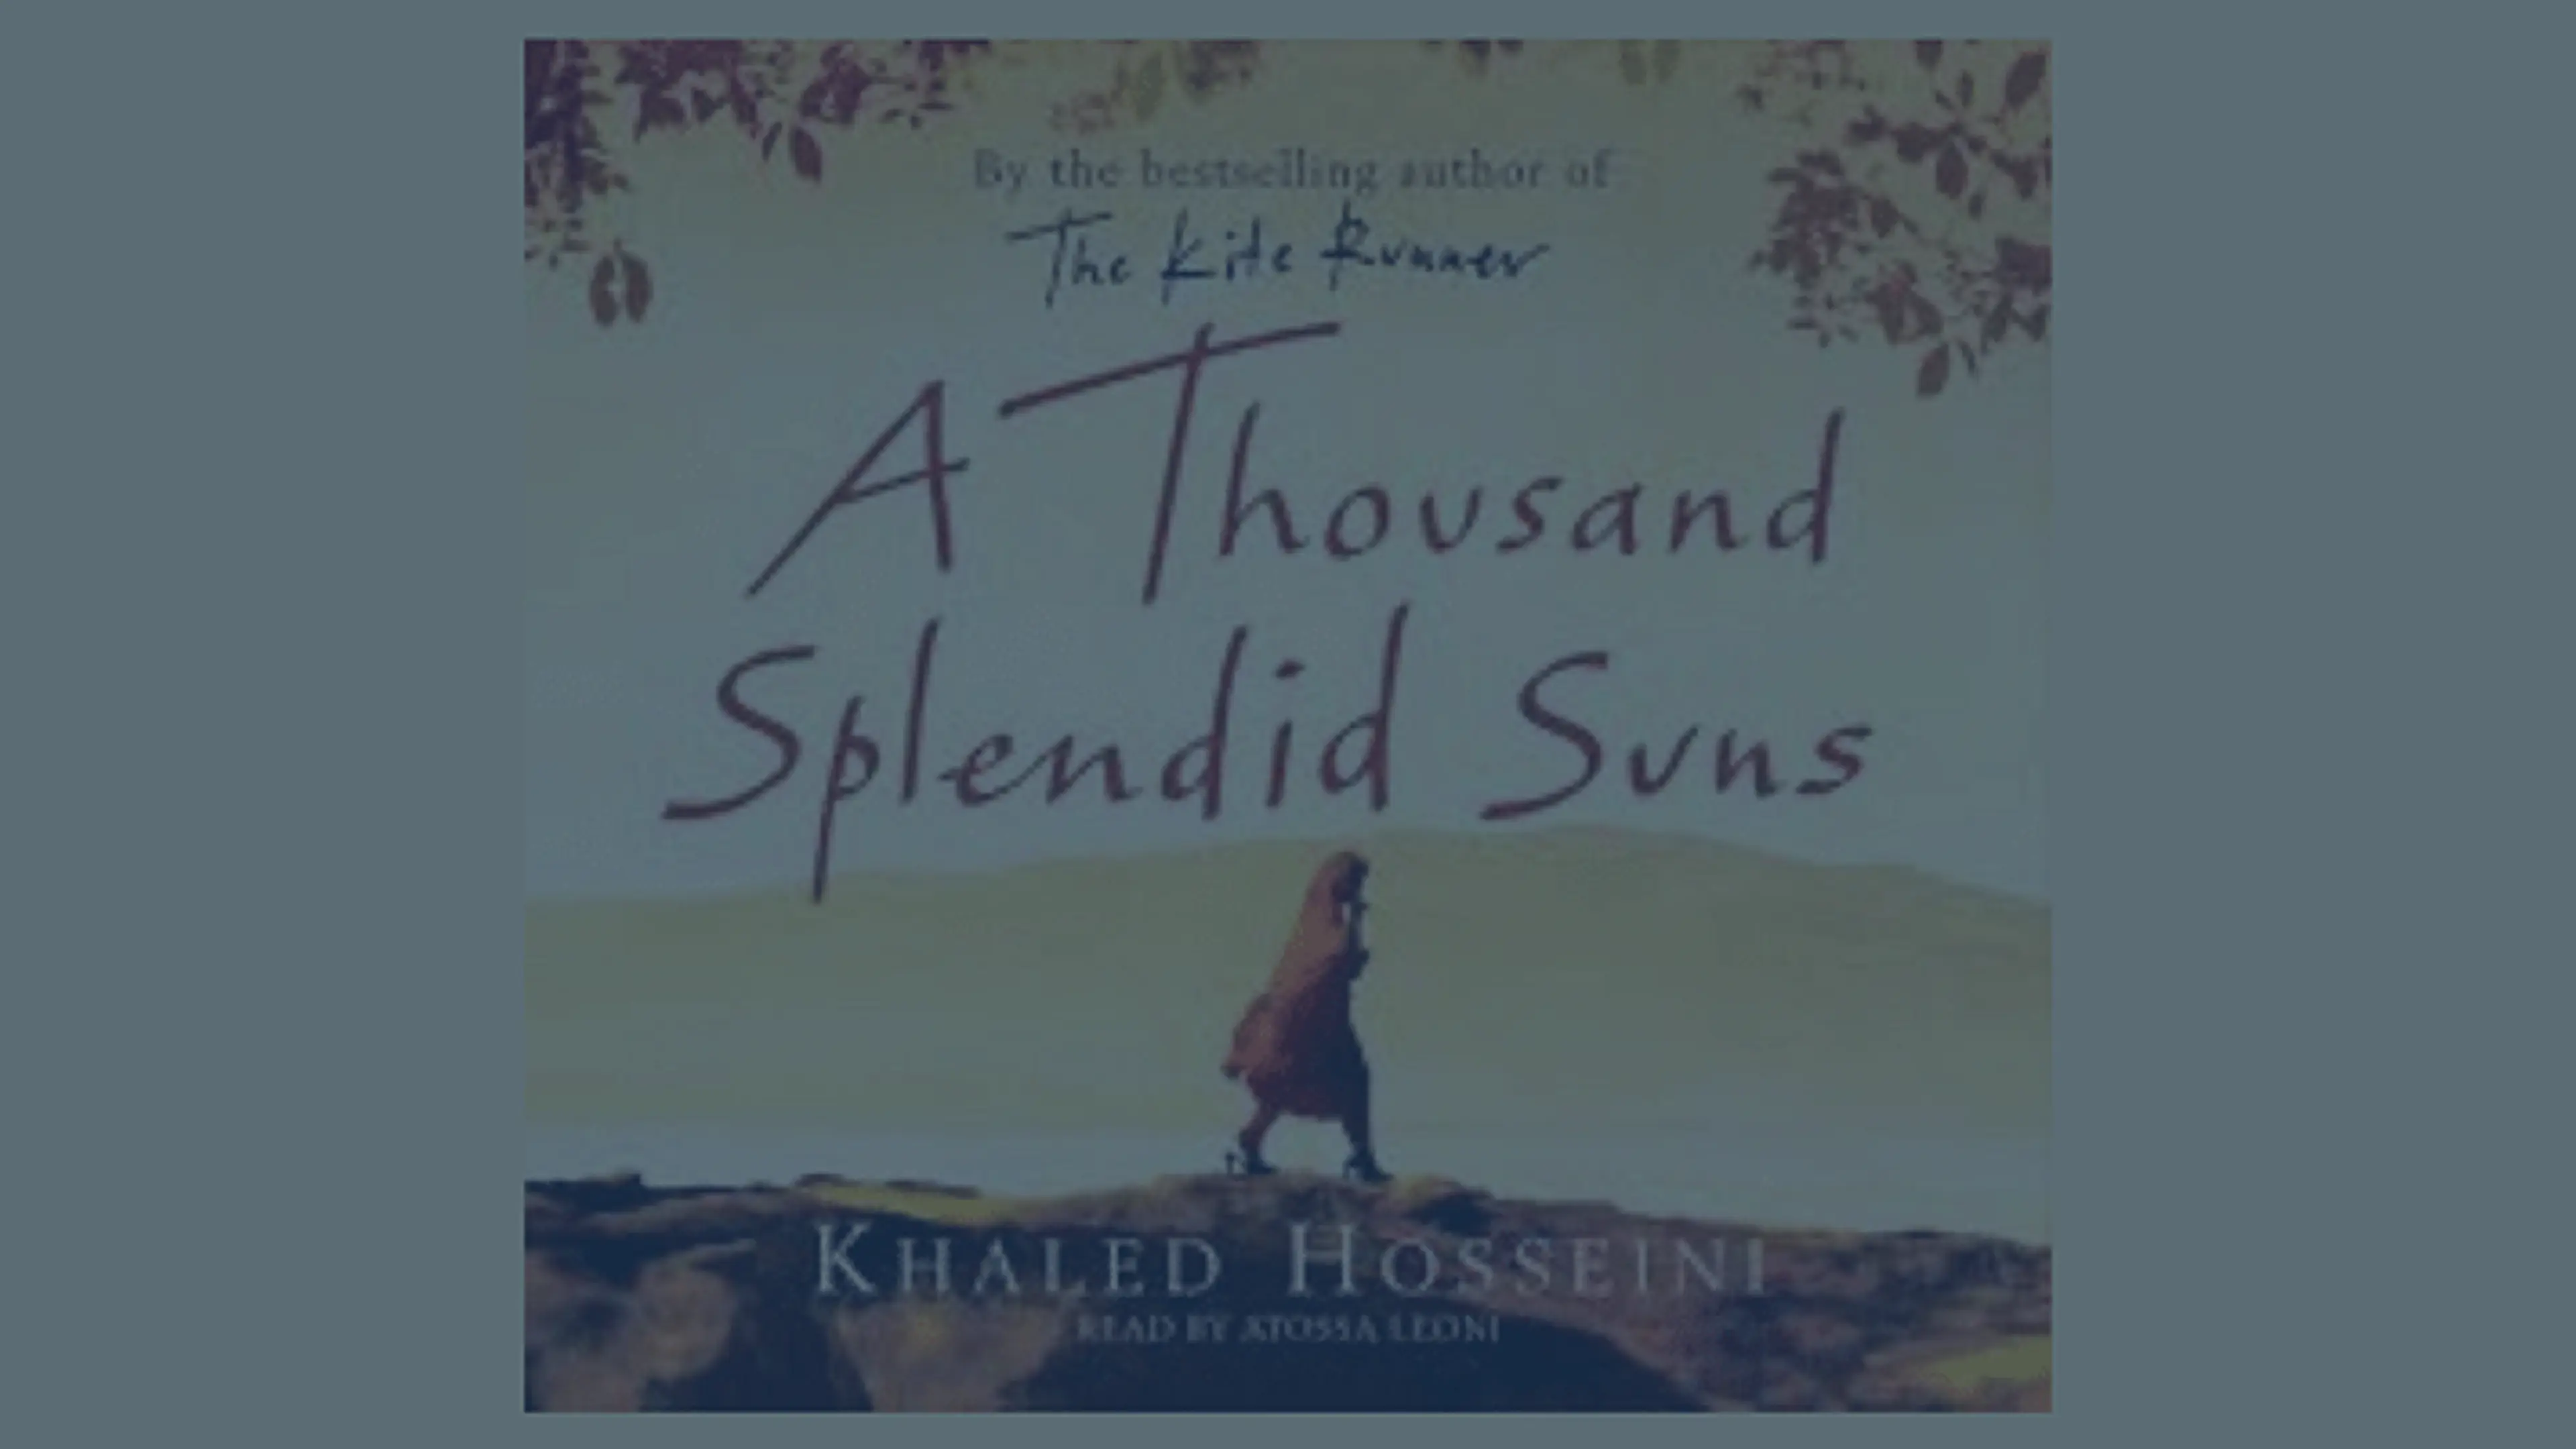 Powerful quotes: Lessons from 'A Thousand Splendid Suns'